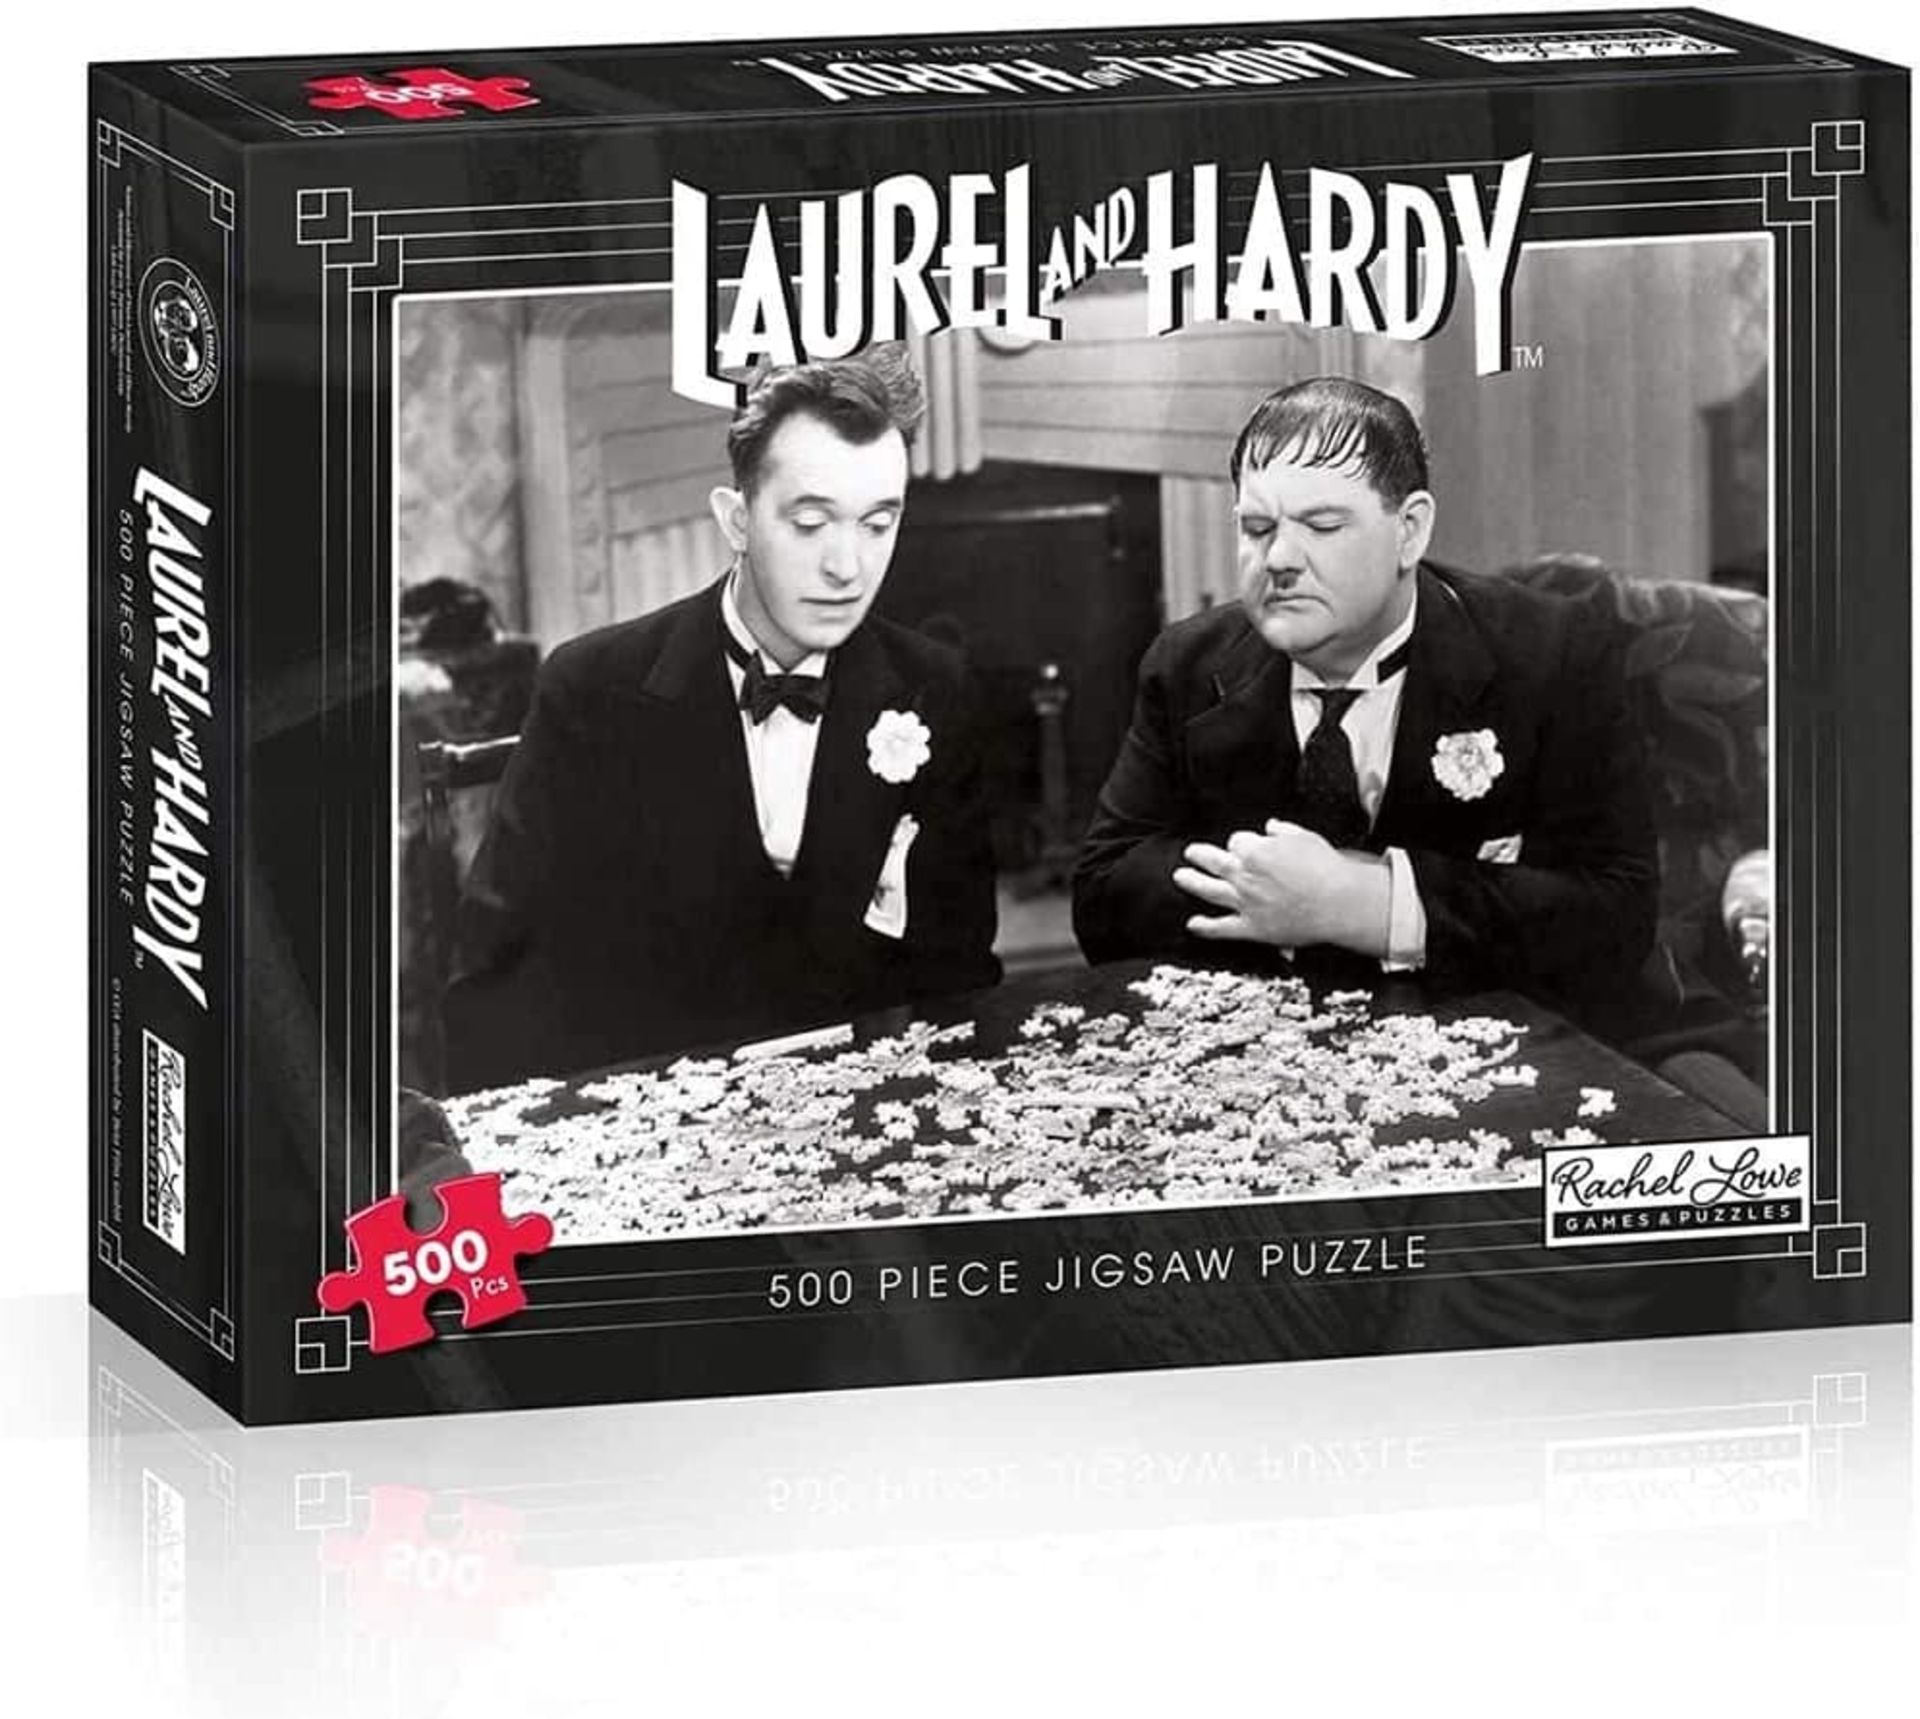 120 X LAUREL AND HARDY 500 PIECE PUZZLE